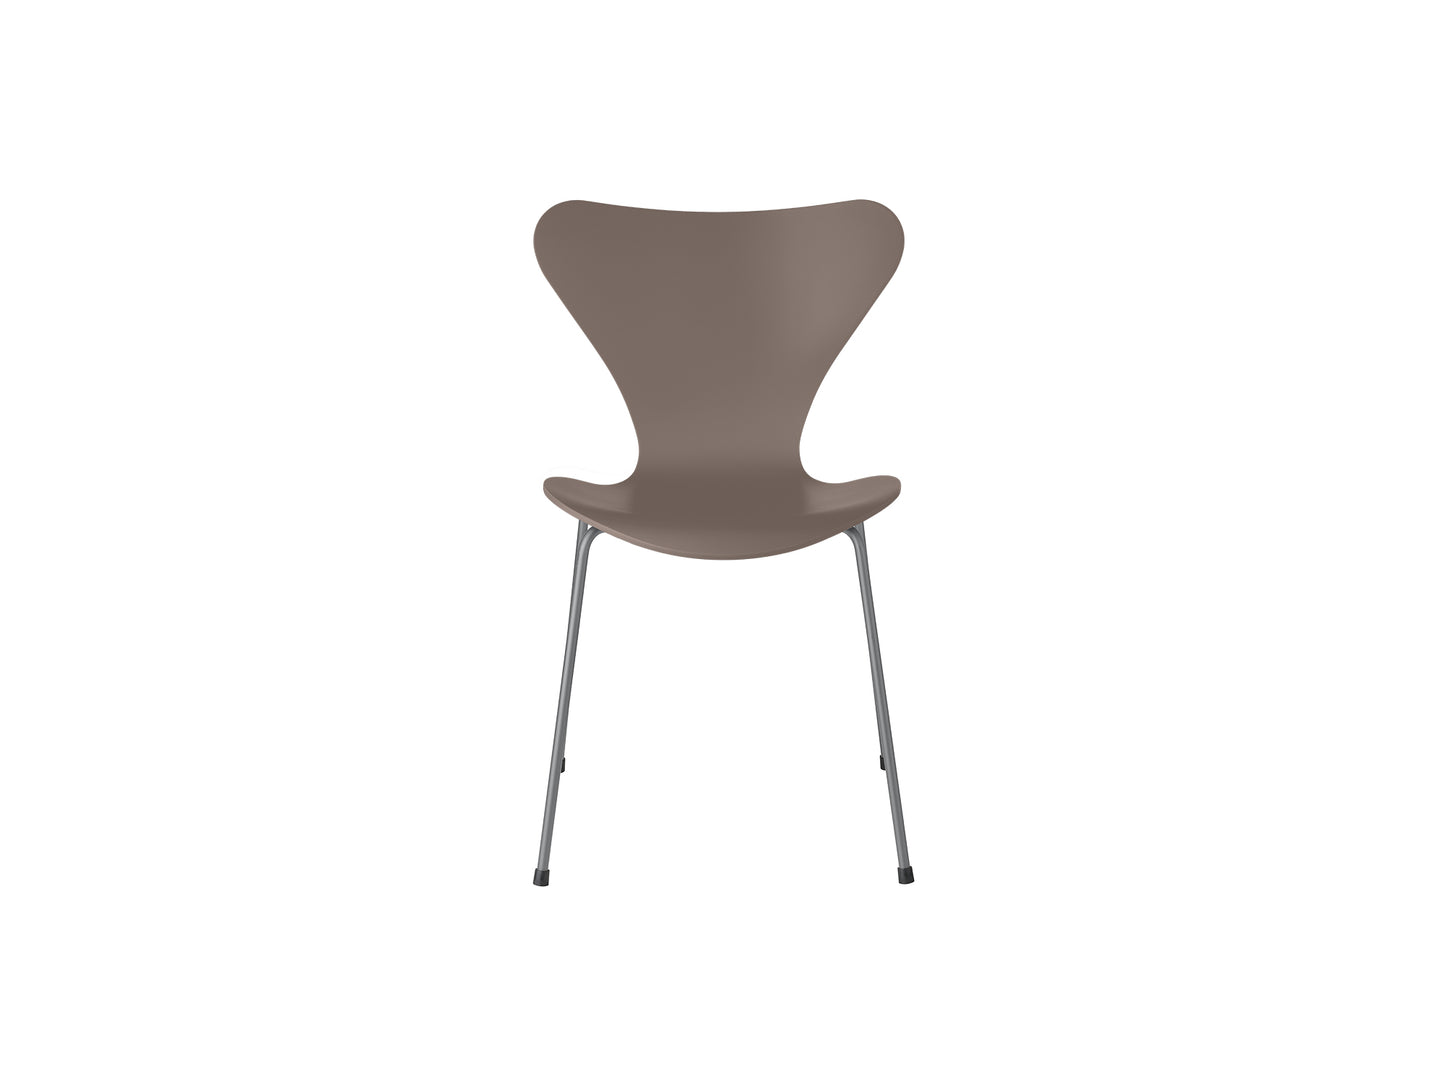 Series 7™ 3107 Dining Chair by Fritz Hansen - Deep Clay Lacquered Veneer Shell / Silver Grey Steel